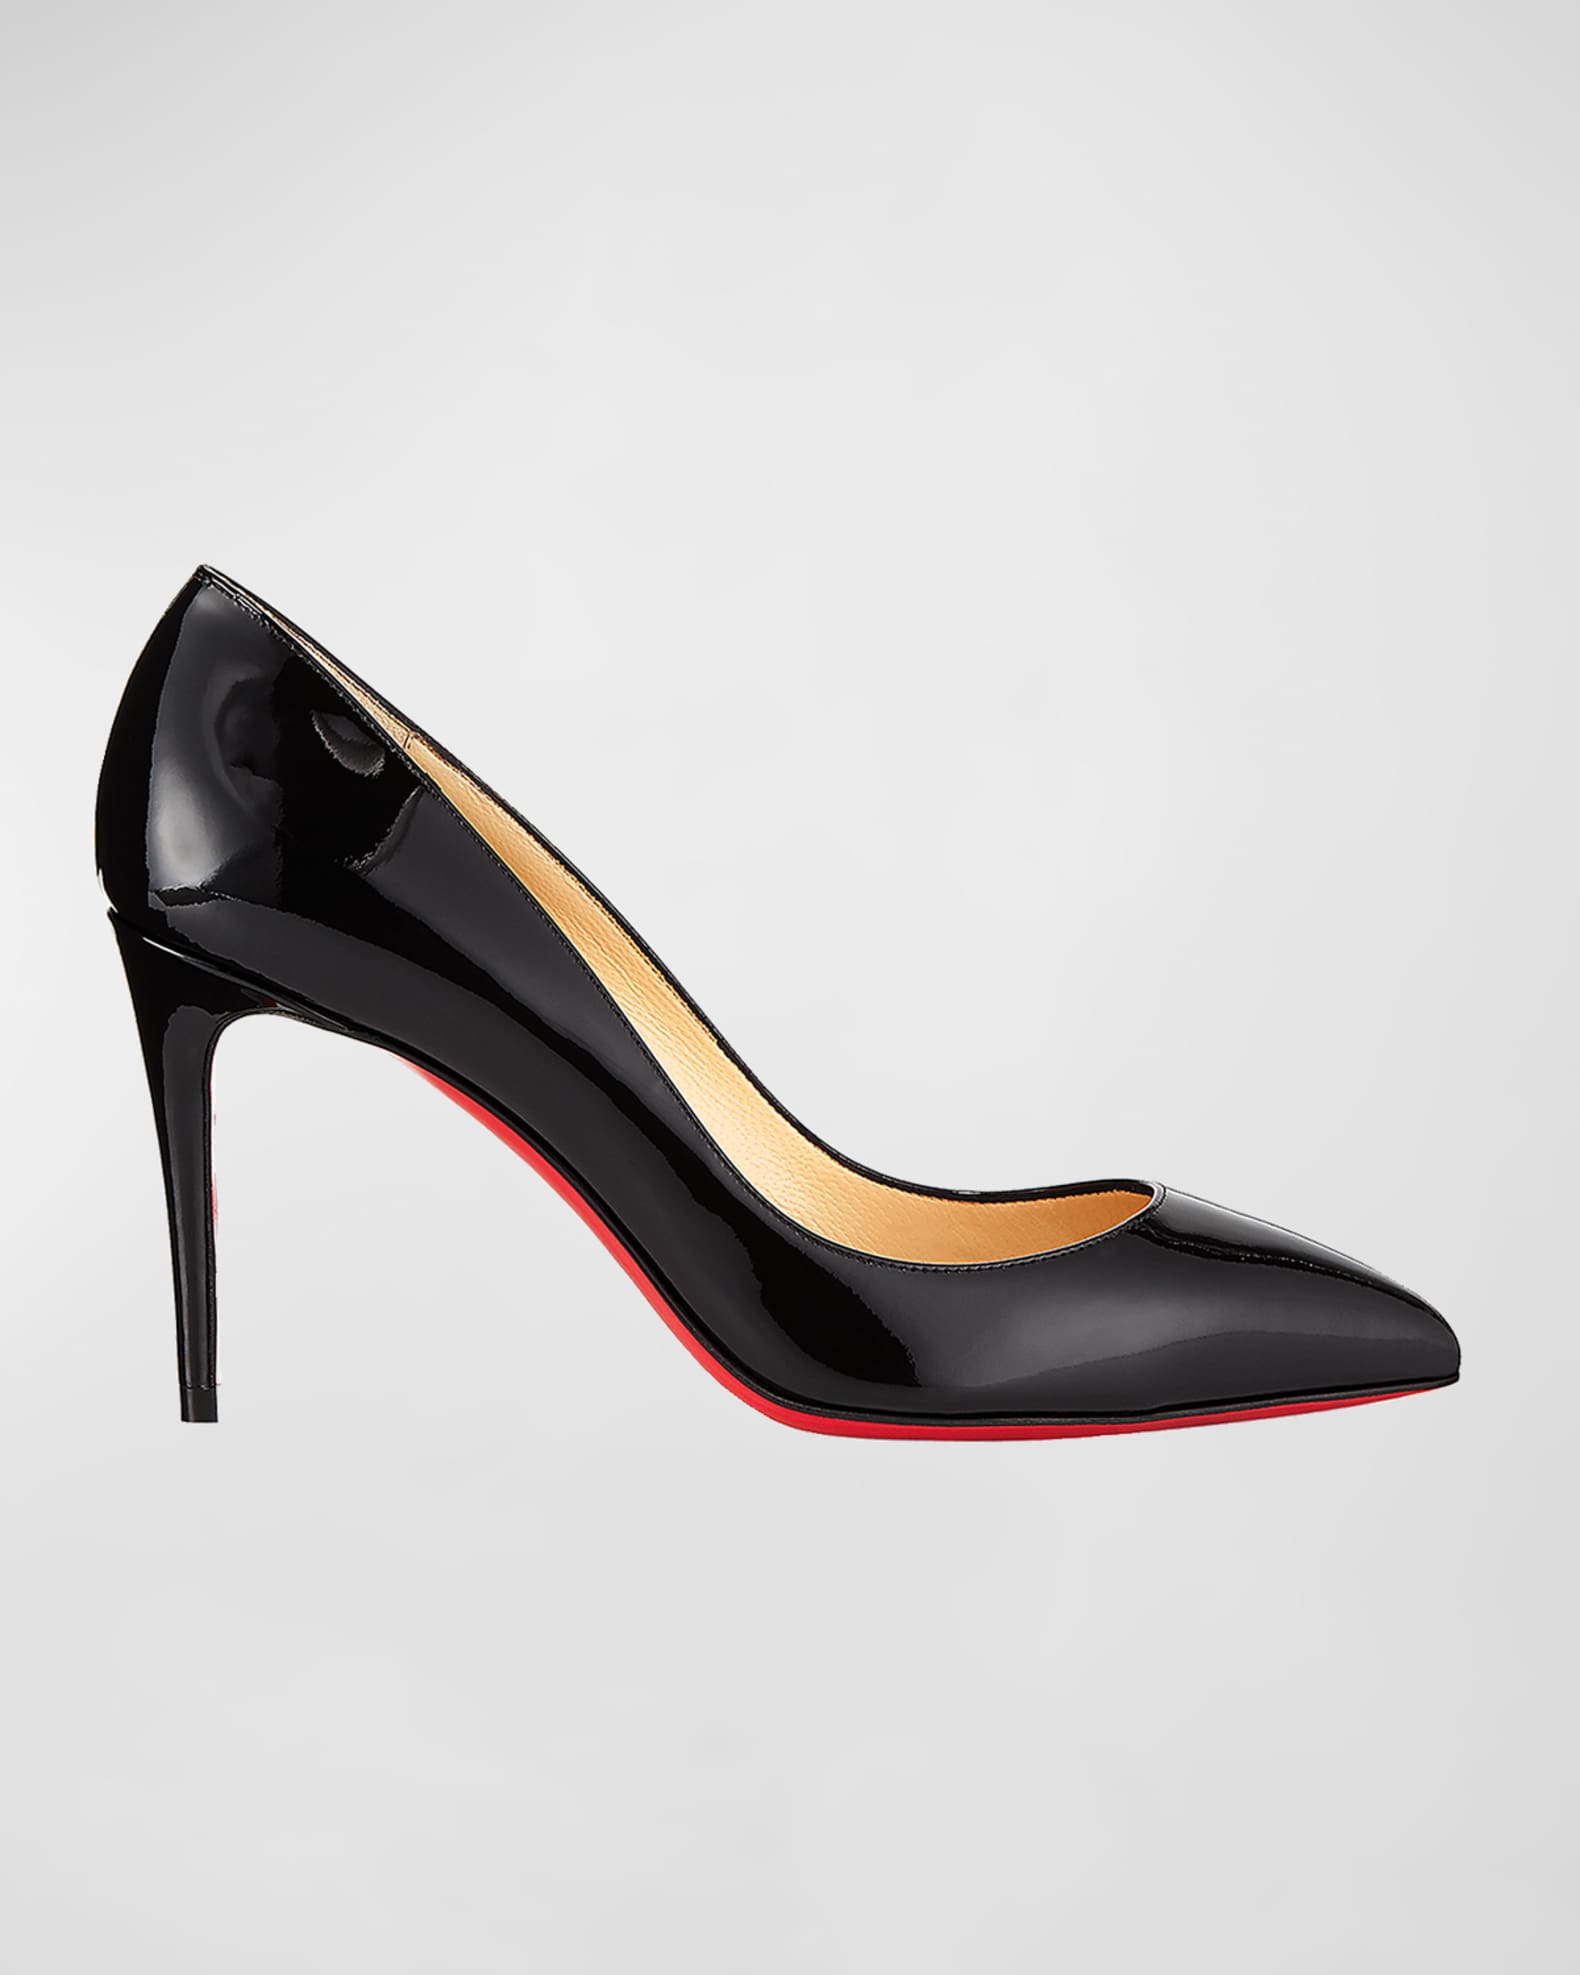 Christian Louboutin Pigalle Follies 85mm Patent Red Sole Pumps | Neiman ...